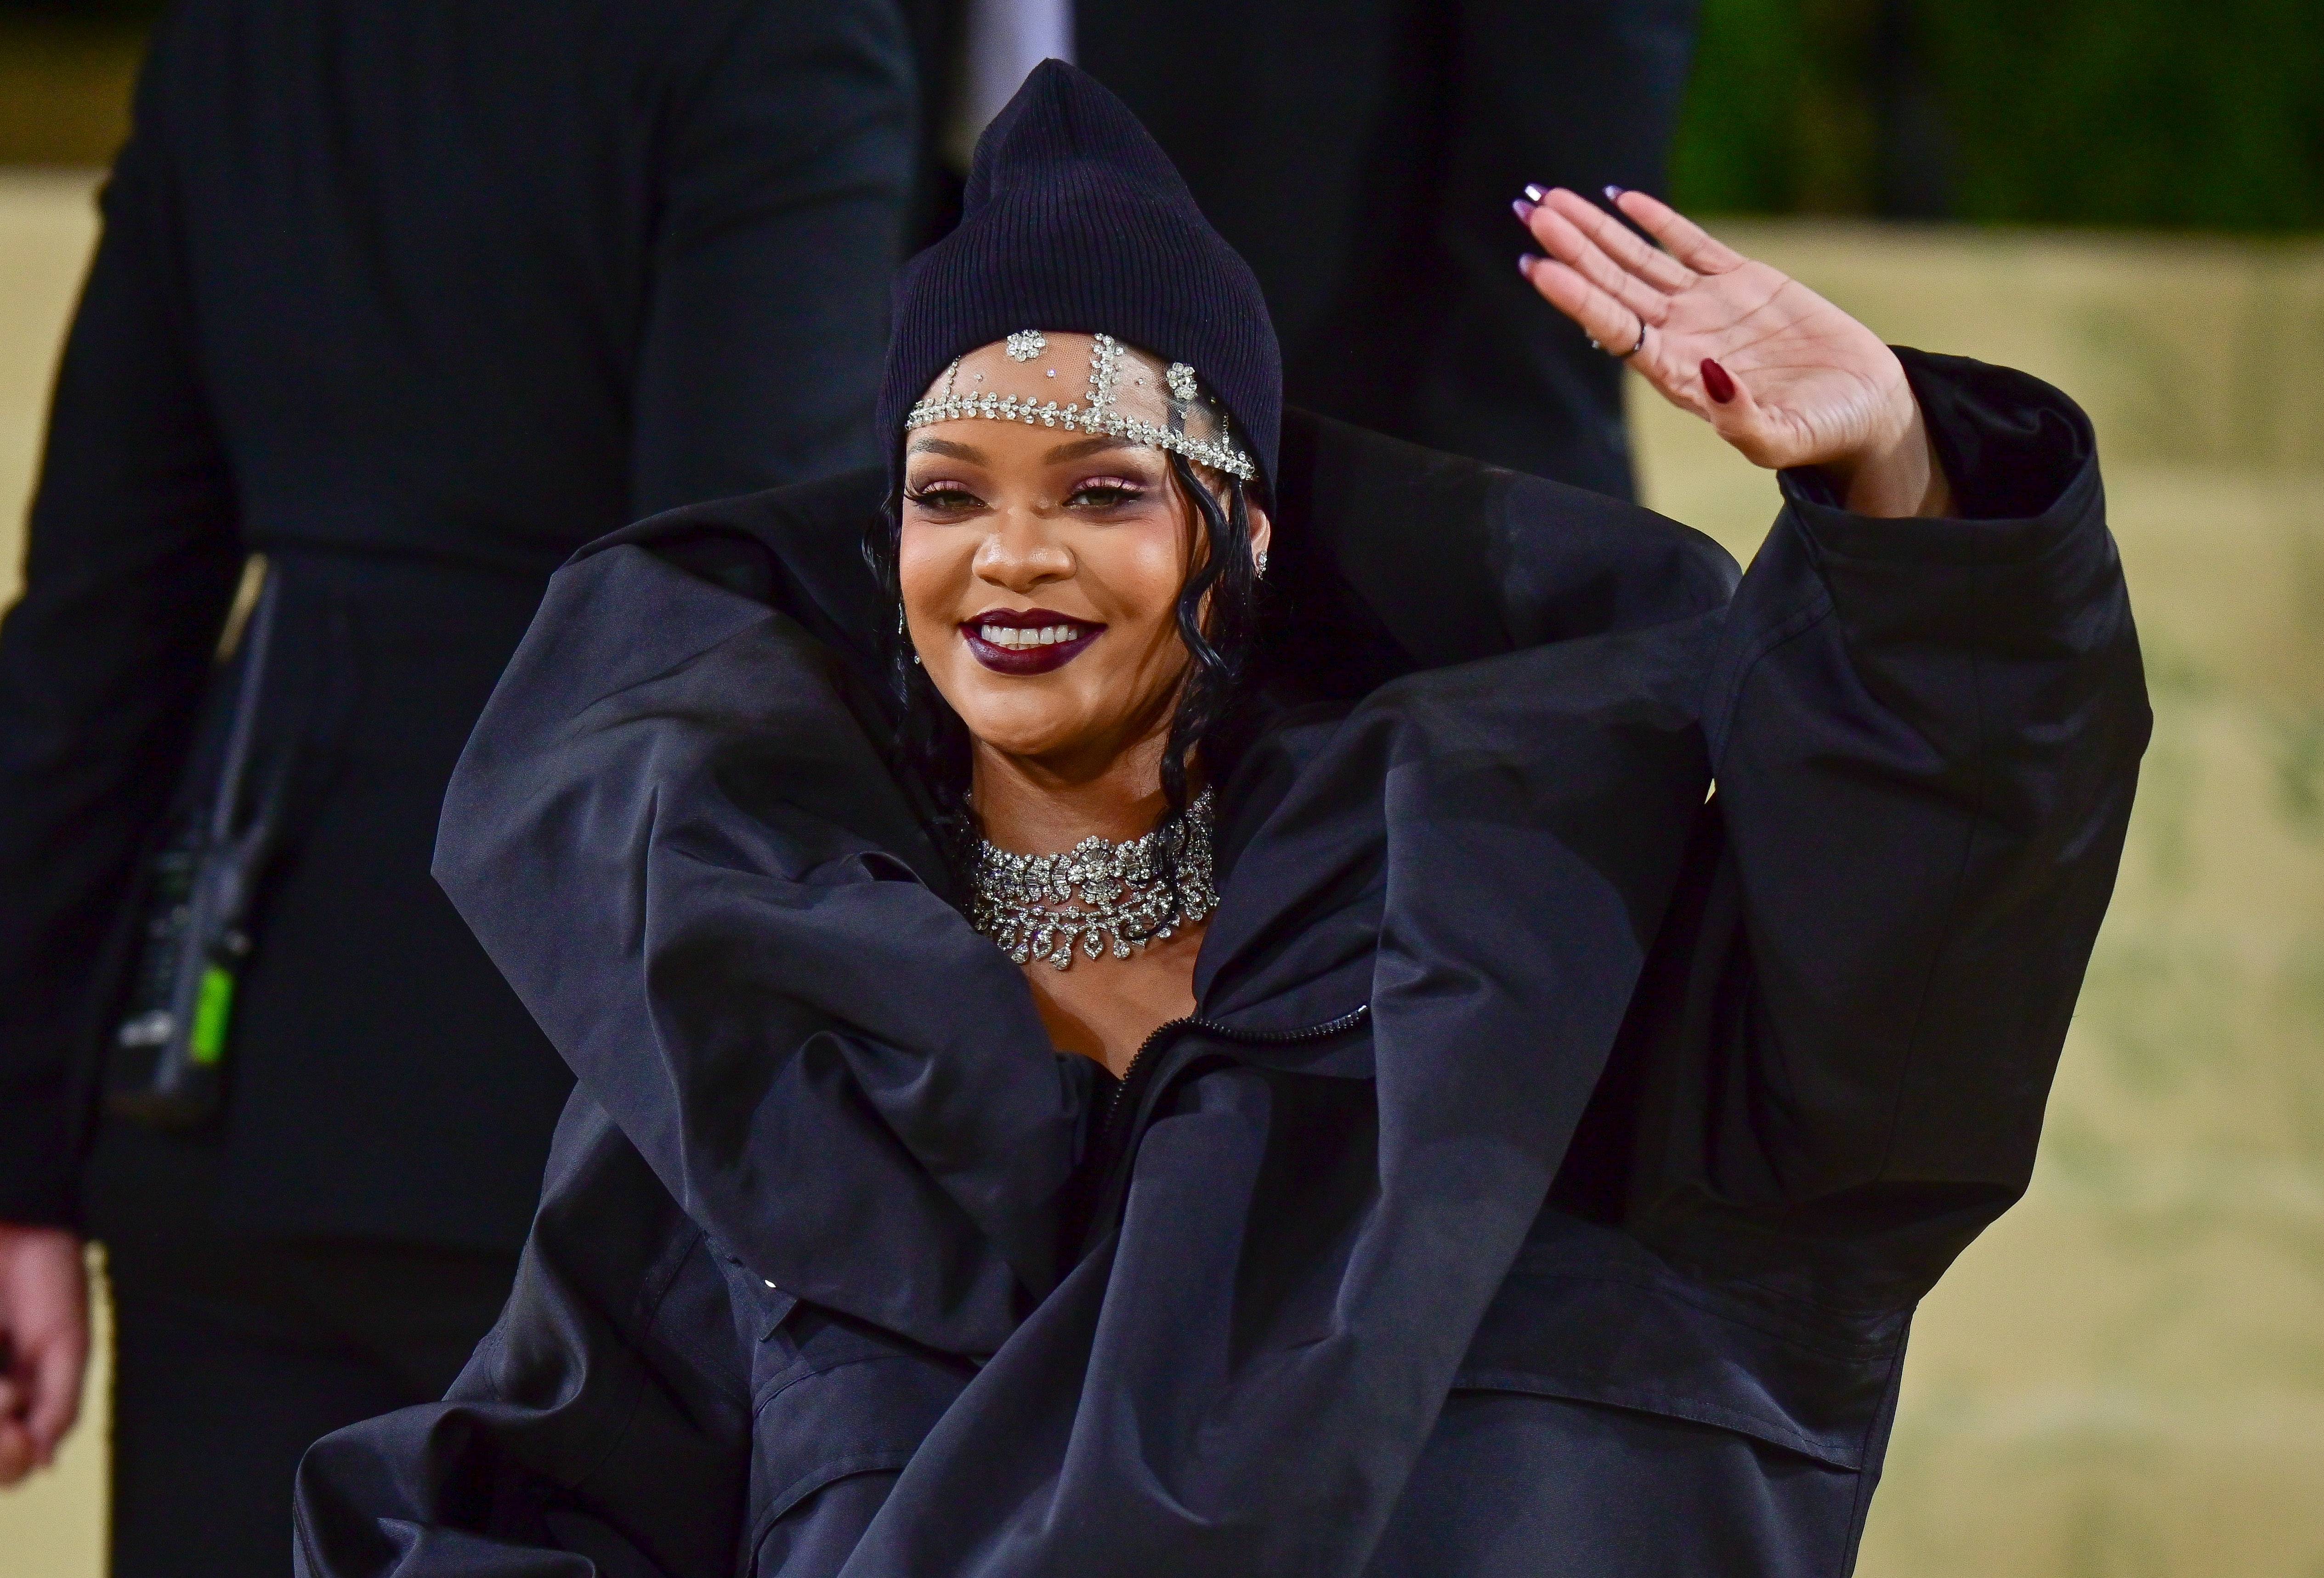 Rihanna appears on the red carpet for the 2022 Met Gala decked out in all black and waves to her adorers.